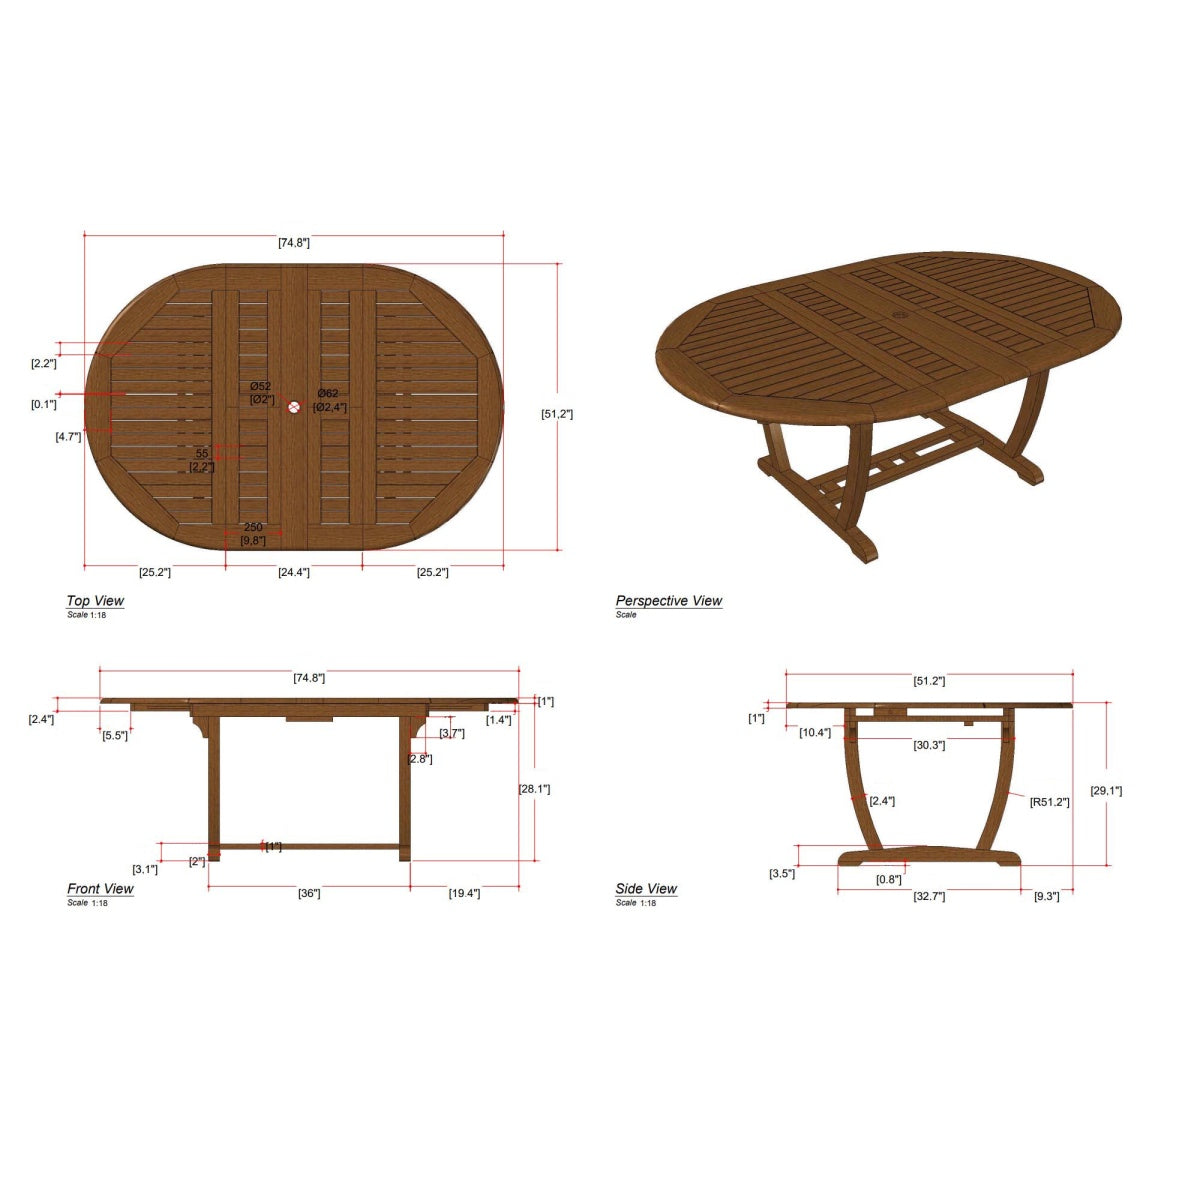 Westminster Teak - Martinique Teak Table Closed 55"; Extends to Oval 65" and 75" - 15548